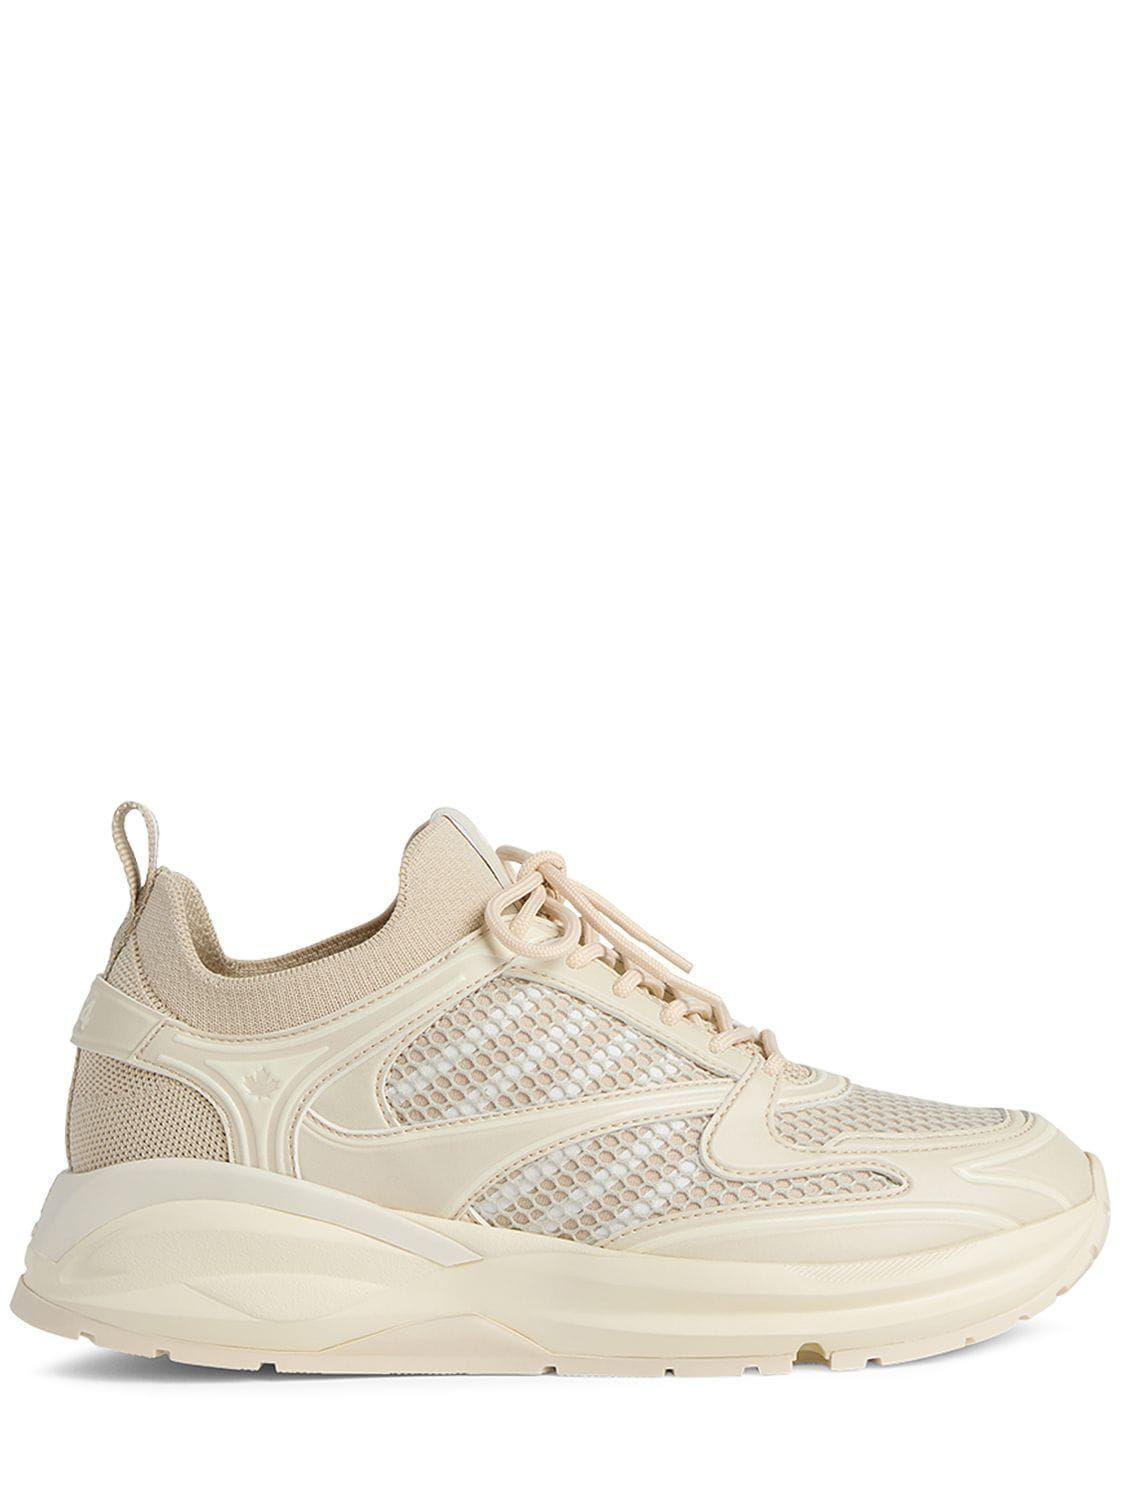 DSquared² S24 Dash Leather & Mesh Sneakers in White | Lyst